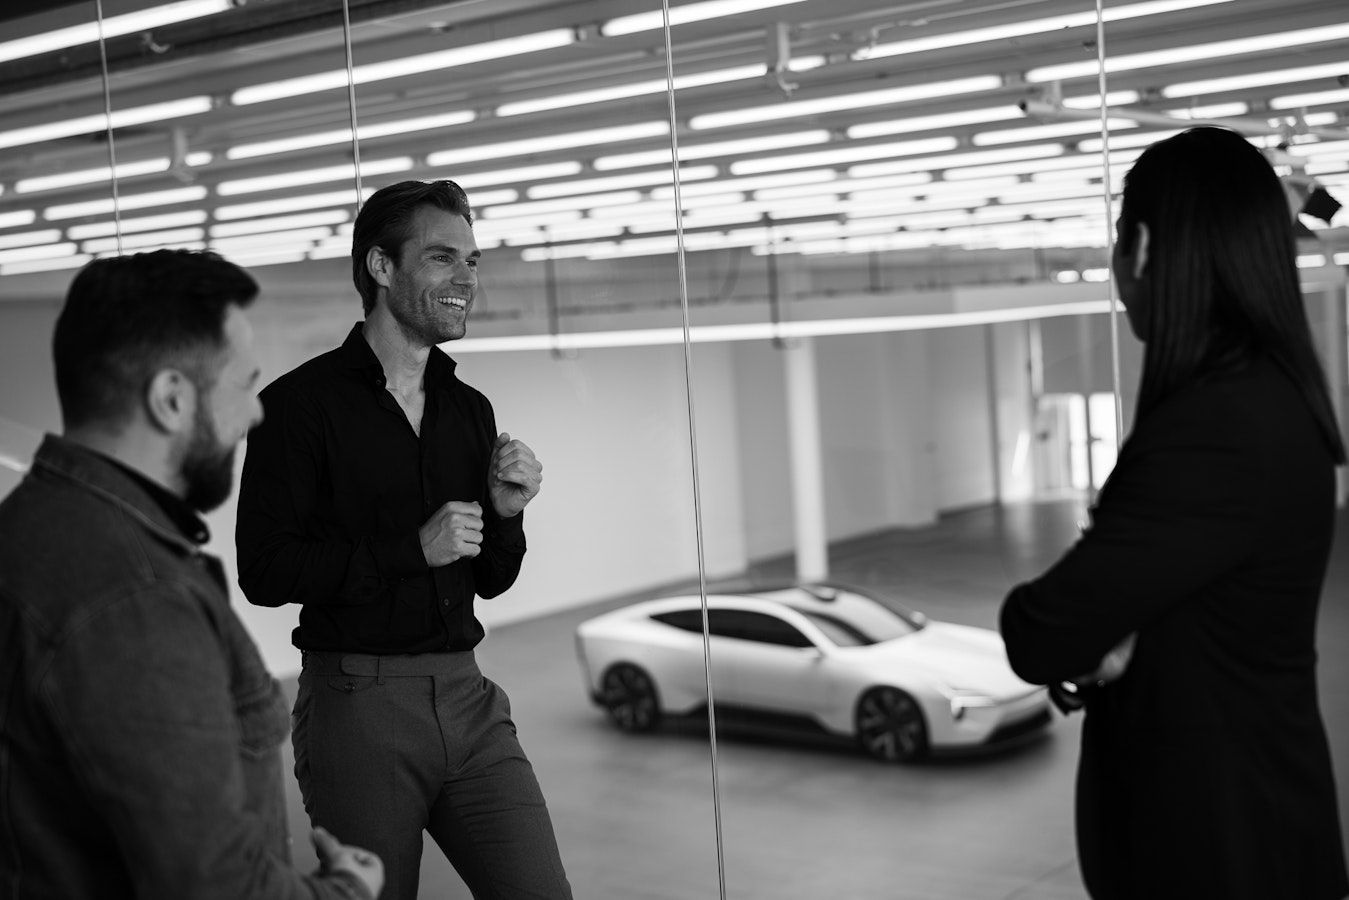 Polestar Design Contest supports and promotes innovation within design.